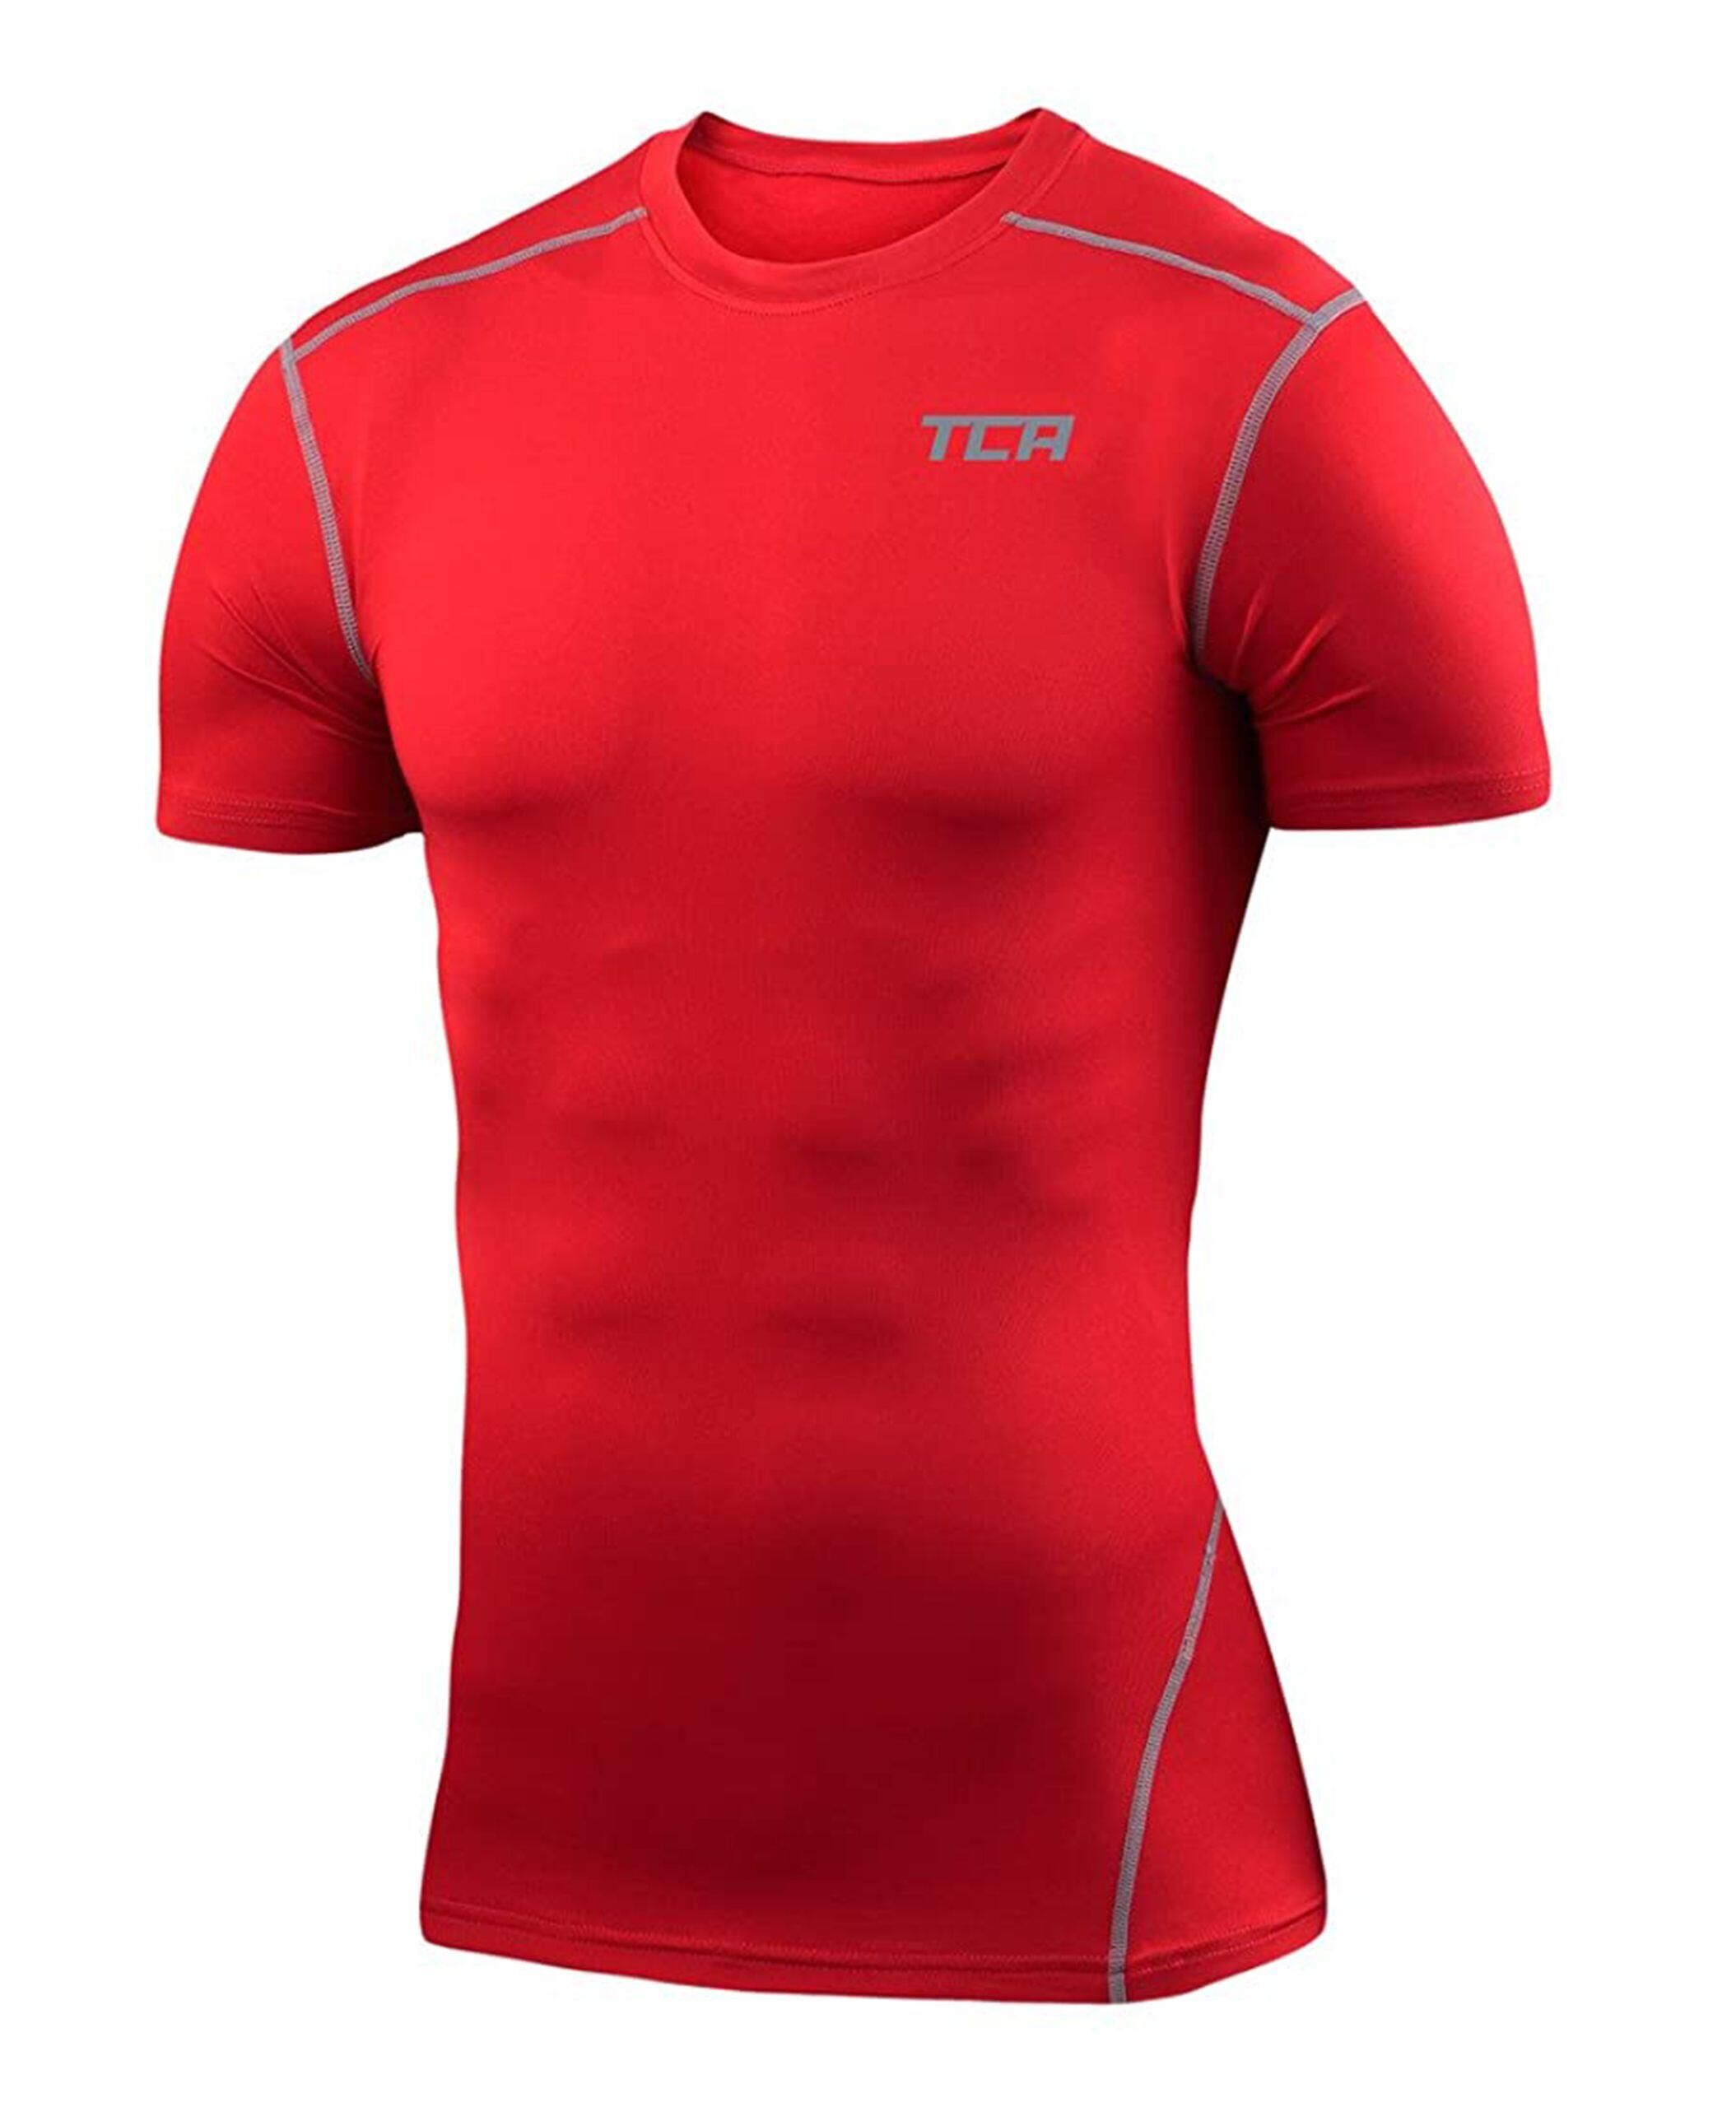 TCA Men's Performance Base Layer Compression T-shirt - Team Red